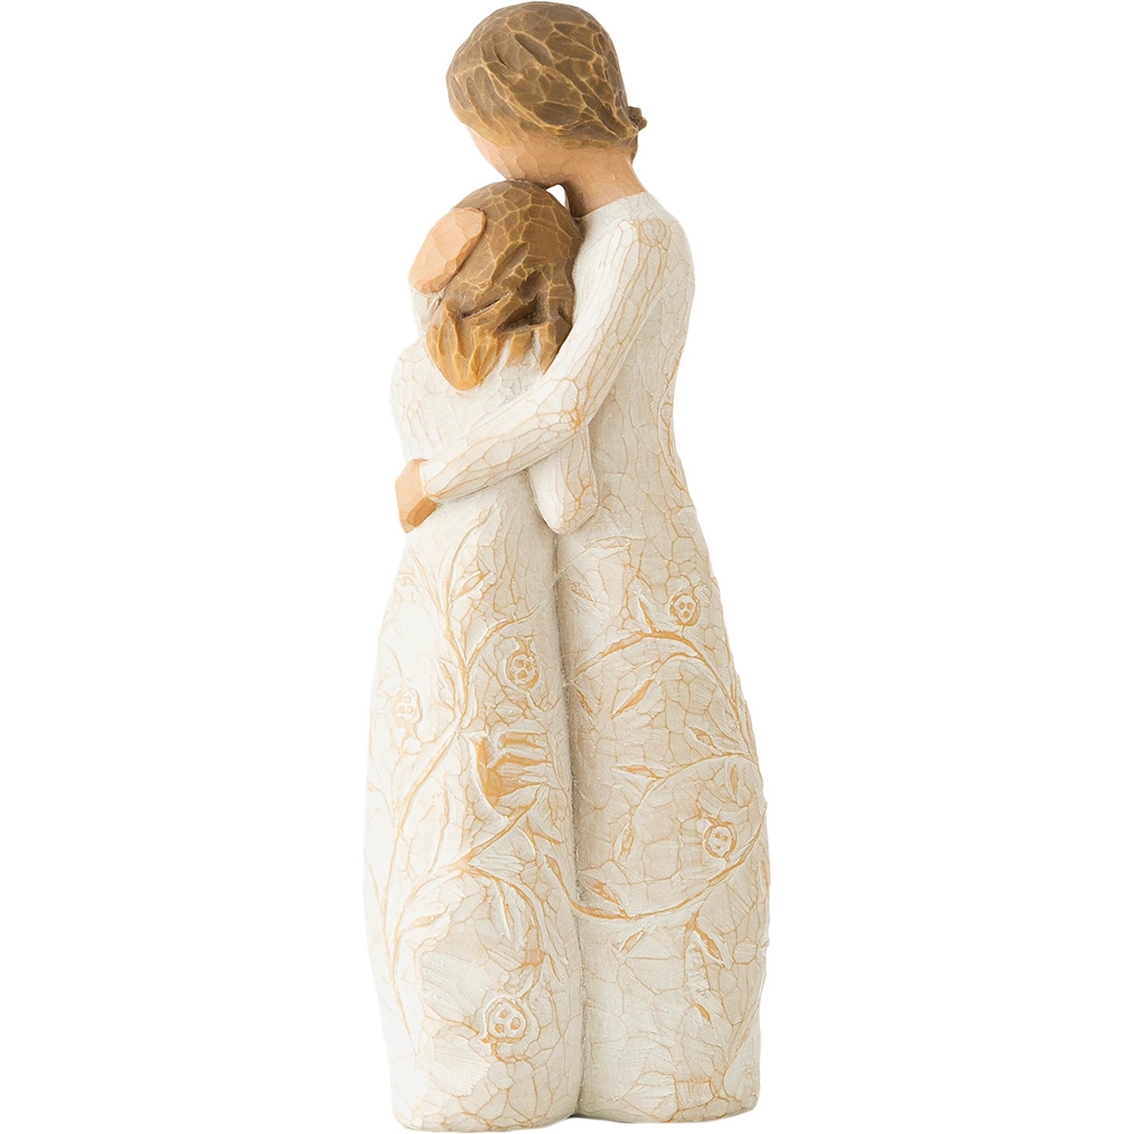 Willow Tree Close To Me Figurine - Image 2 of 3